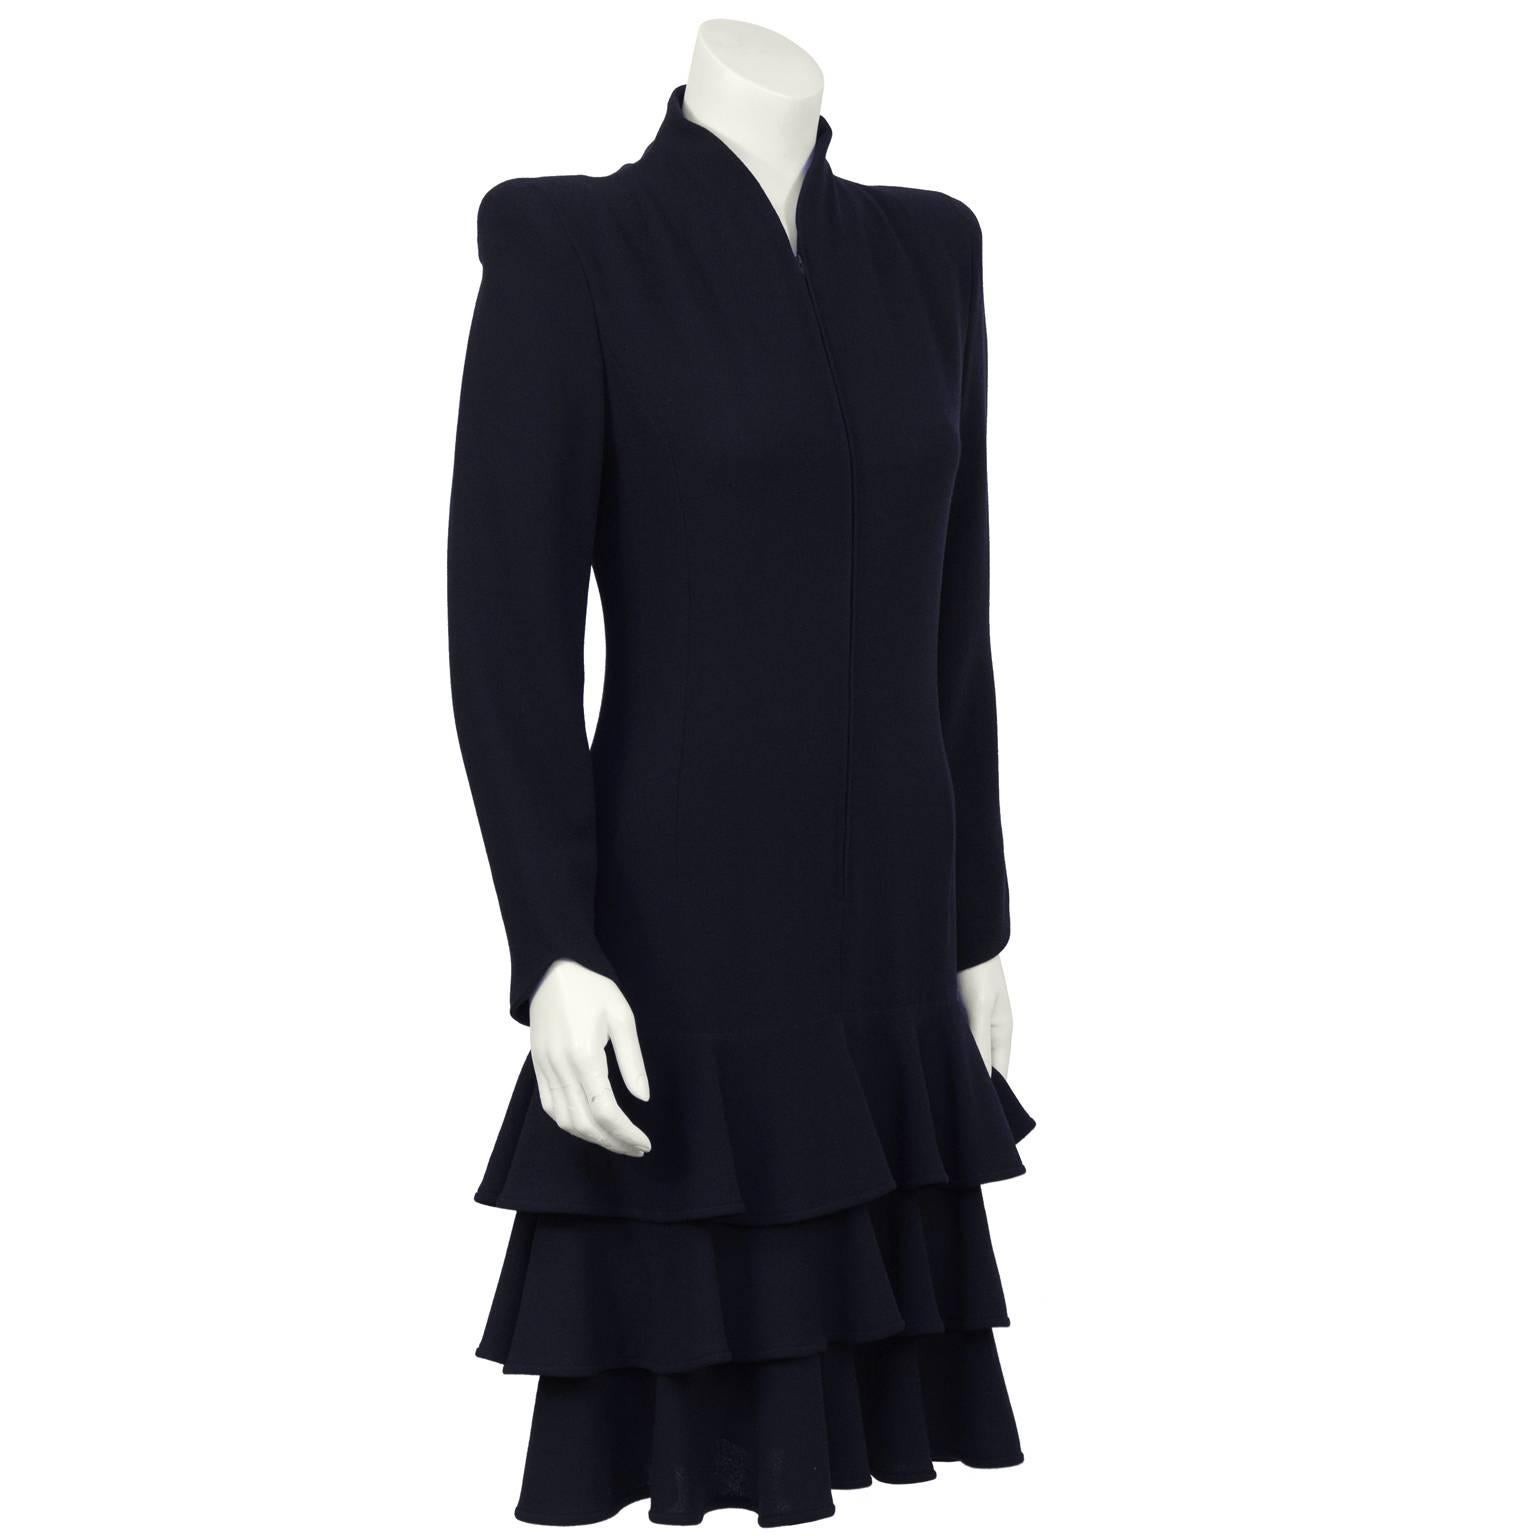 Valentino 1980’s navy drop-waist wool crepe dress with layered flounce skirt. The high collar and slightly padded shoulders give this dress great structure.  Does up with a long zipper down the front. Zippers at each wrist. Excellent condition. Fits